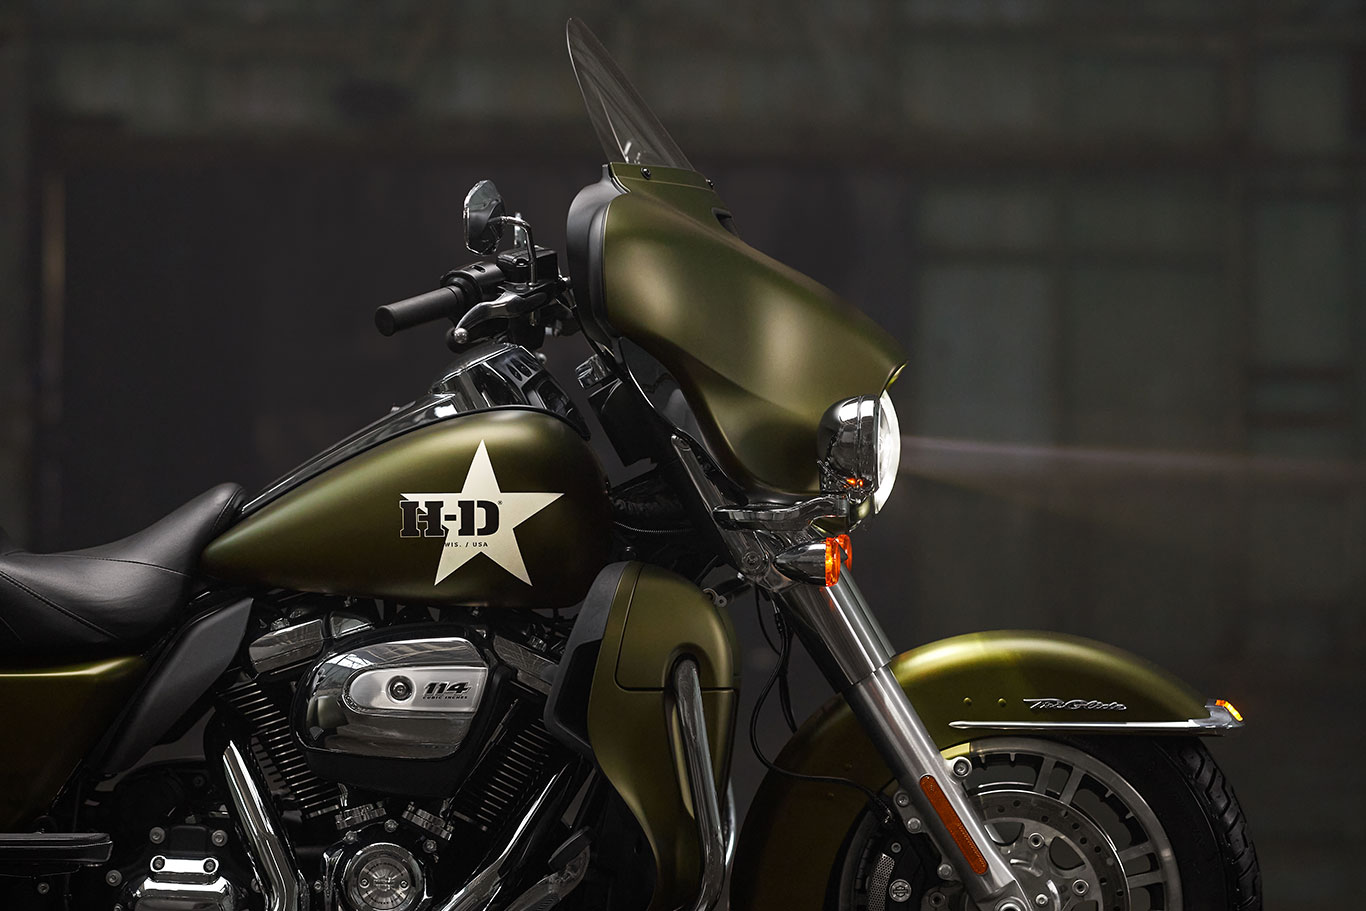 Harley-Davidson G.I. Enthusiast Collection: Limited-Edition Models 